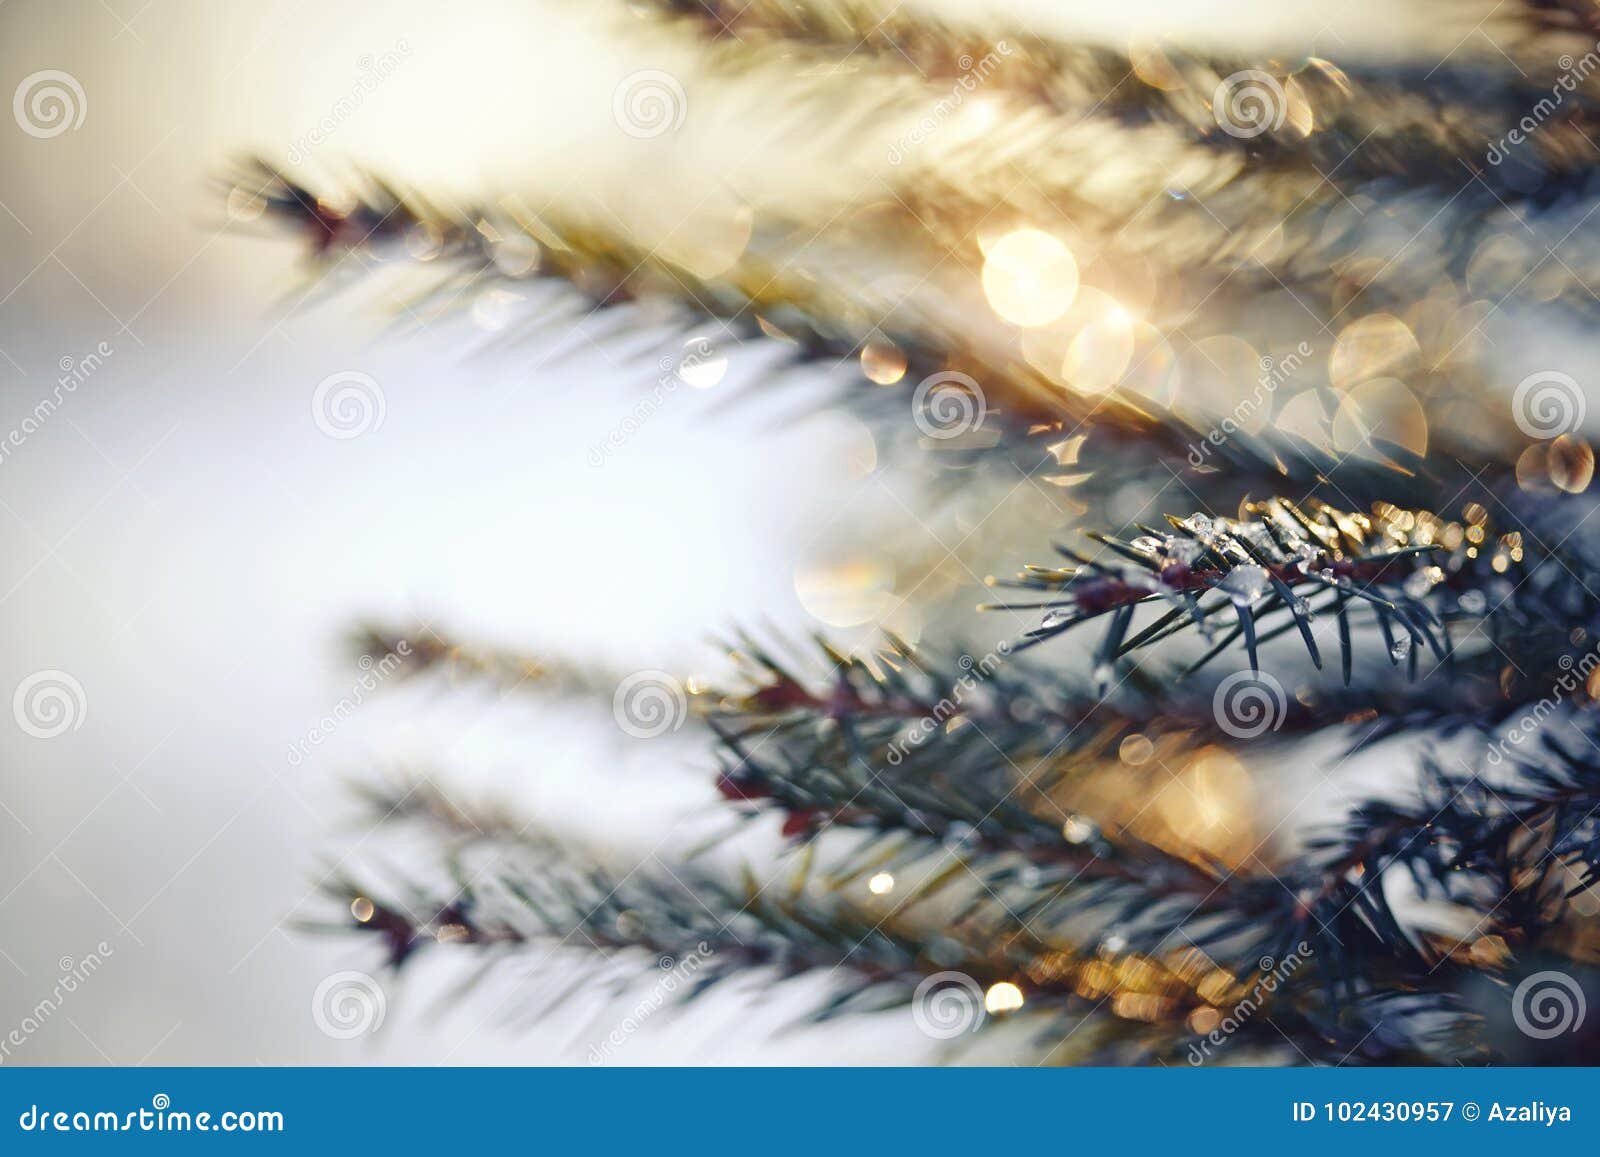 Sparkling Ice Drops on Fir-tree Branches. Stock Image - Image of needle ...